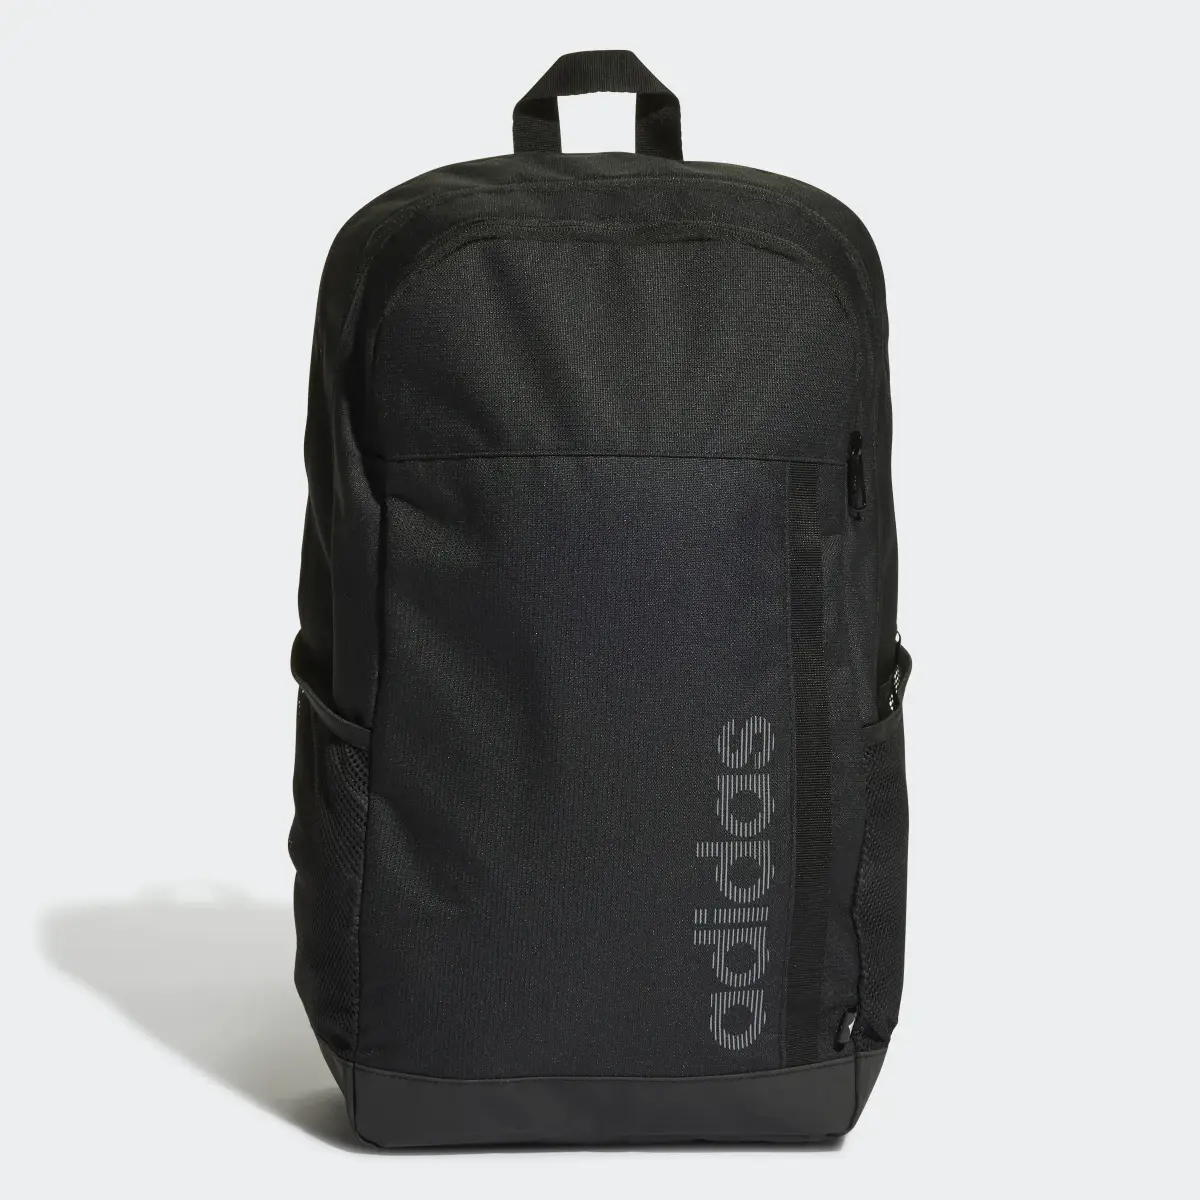 Adidas Motion Linear Backpack. 1